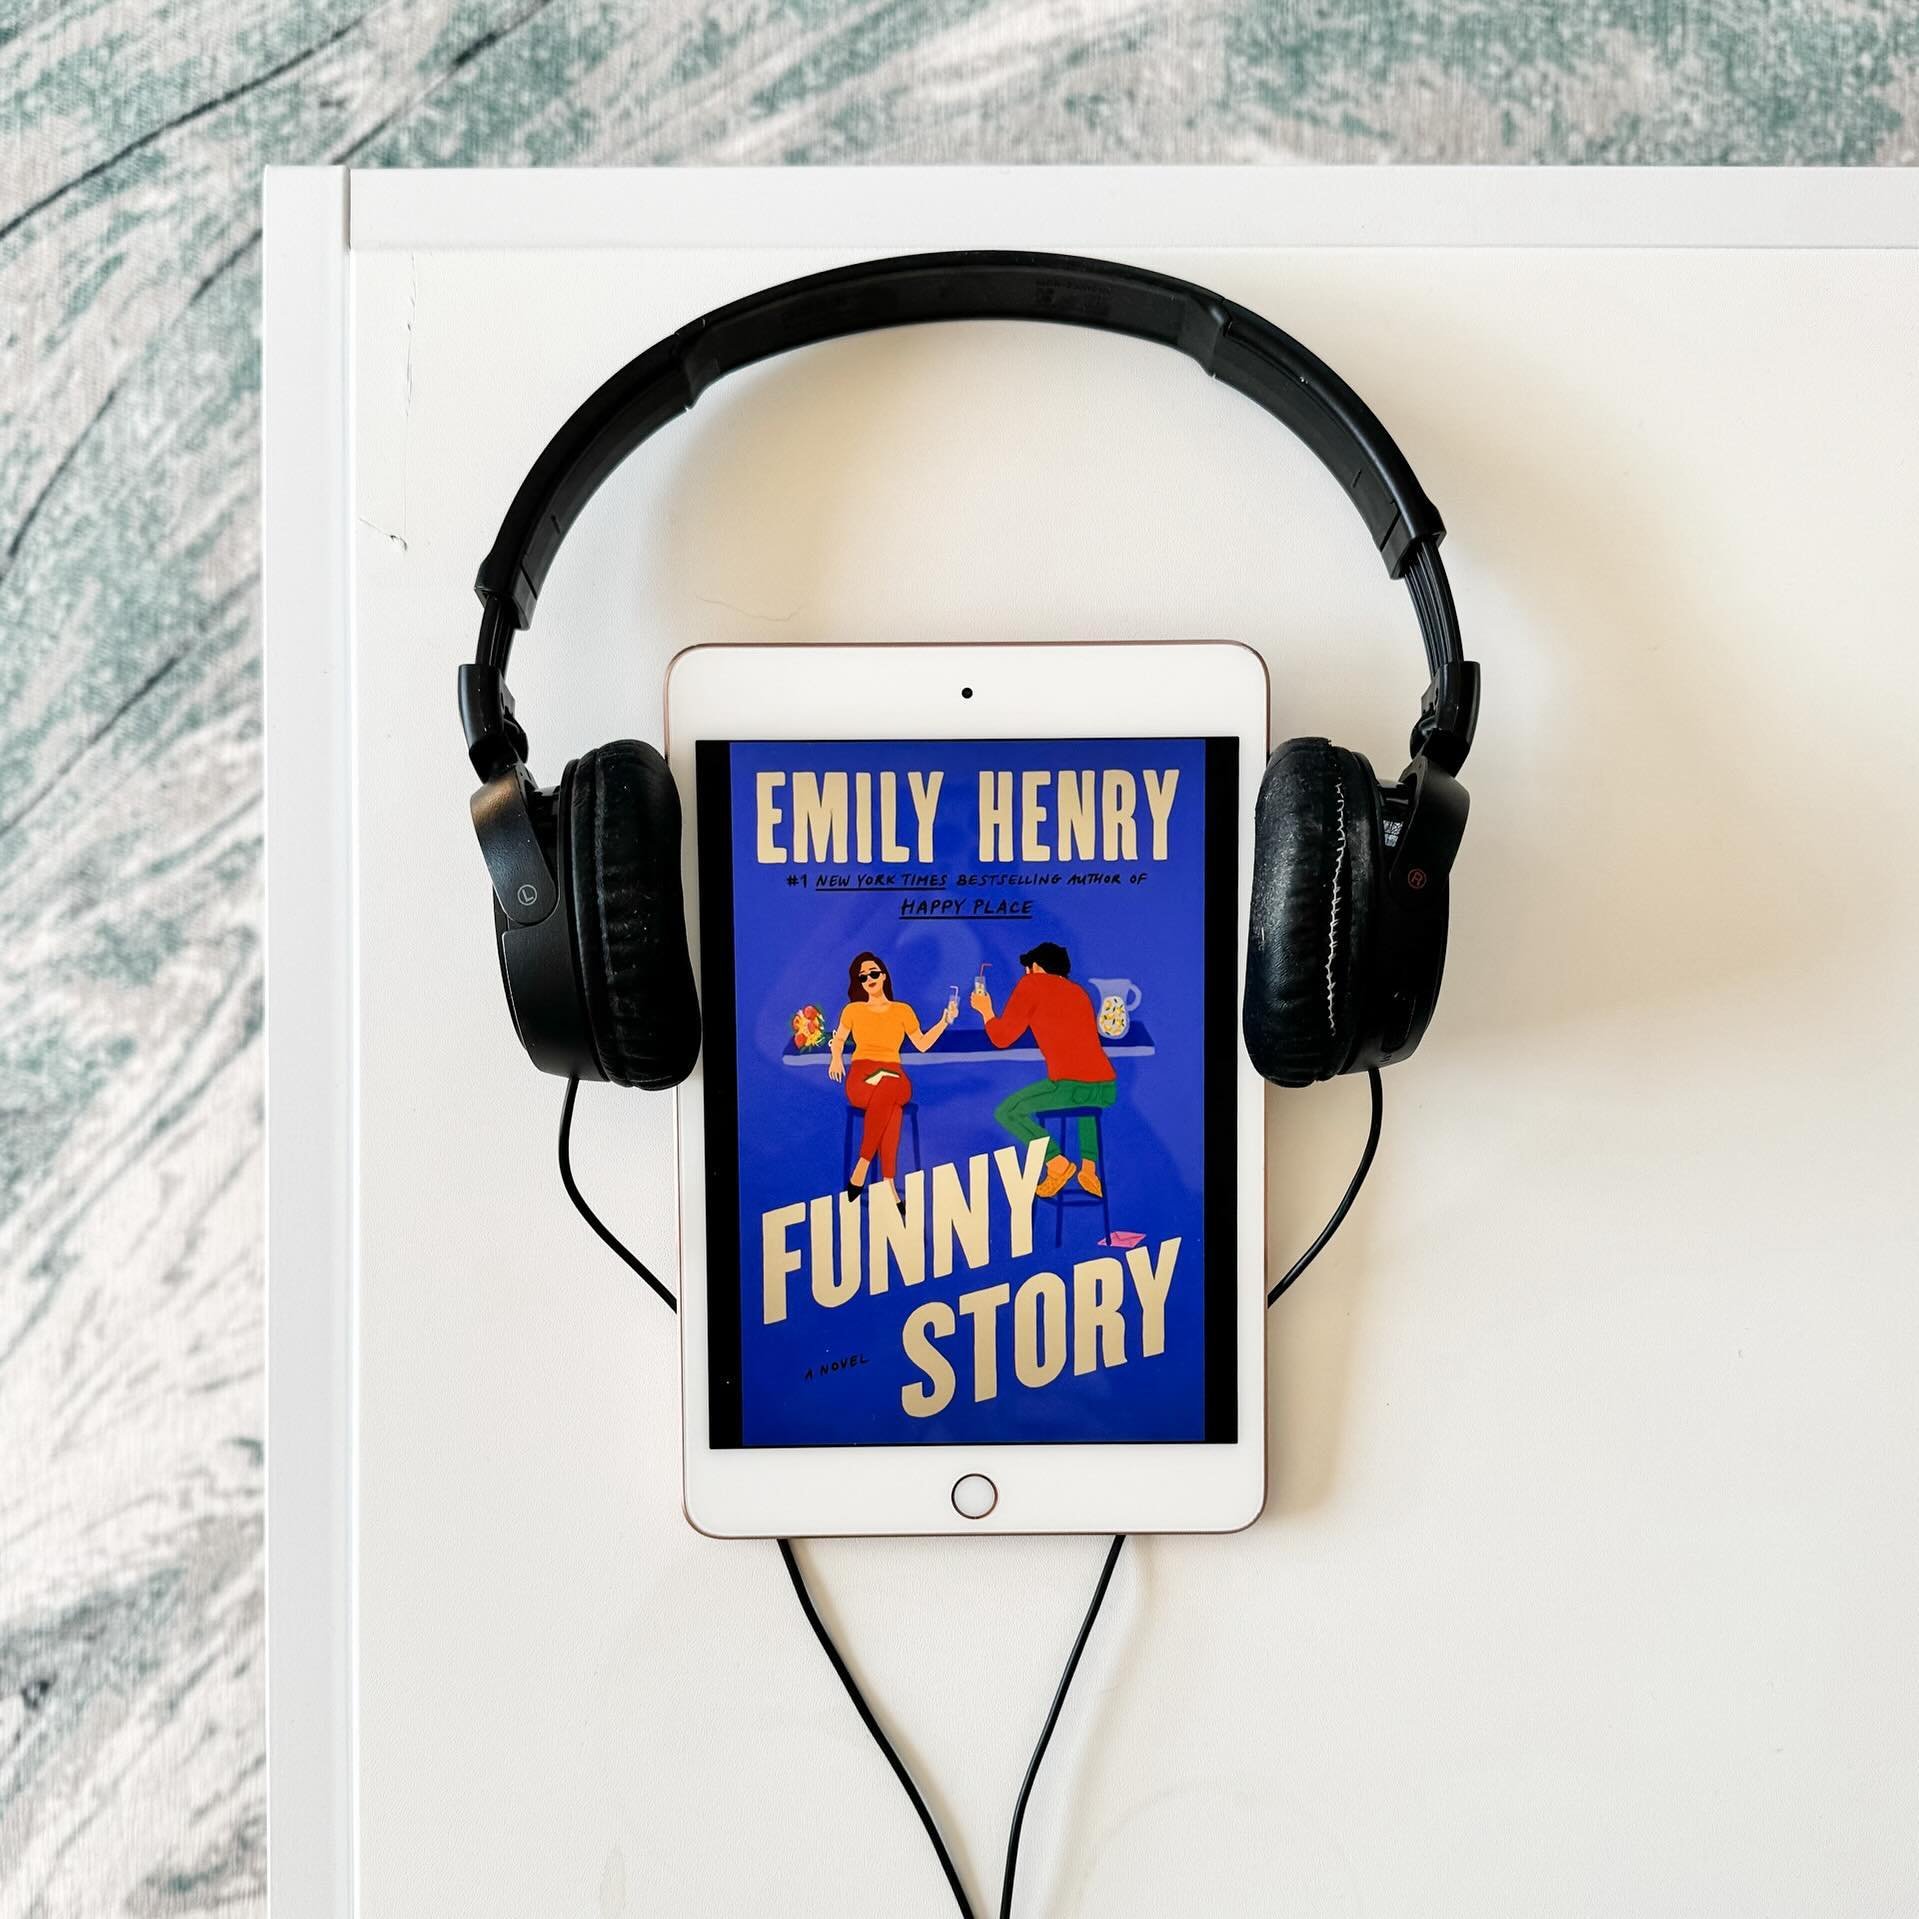 I probably don&rsquo;t even need to tell you this, but Emily Henry has indeed done it again, y&rsquo;all. I devoured this (via audiobook, ty @librofm @prhaudio!) in one sitting, and I loved every second. It&rsquo;s out 4/23!
⠀⠀⠀⠀⠀⠀⠀⠀⠀
ICYMI, Funny St